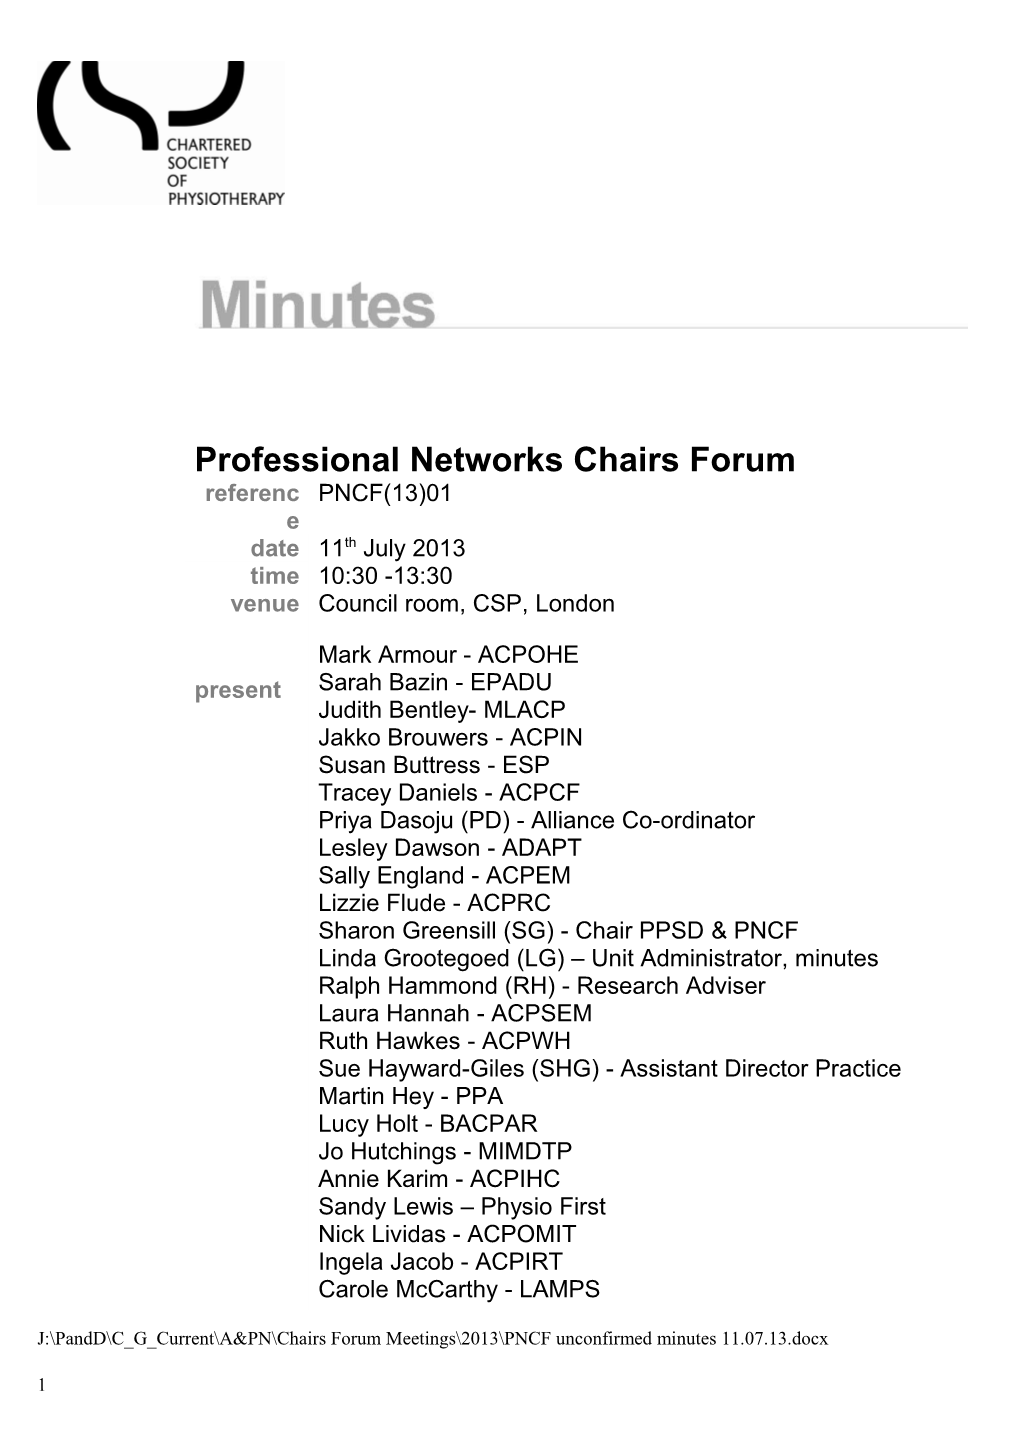 Professional Networks Chairs Forum